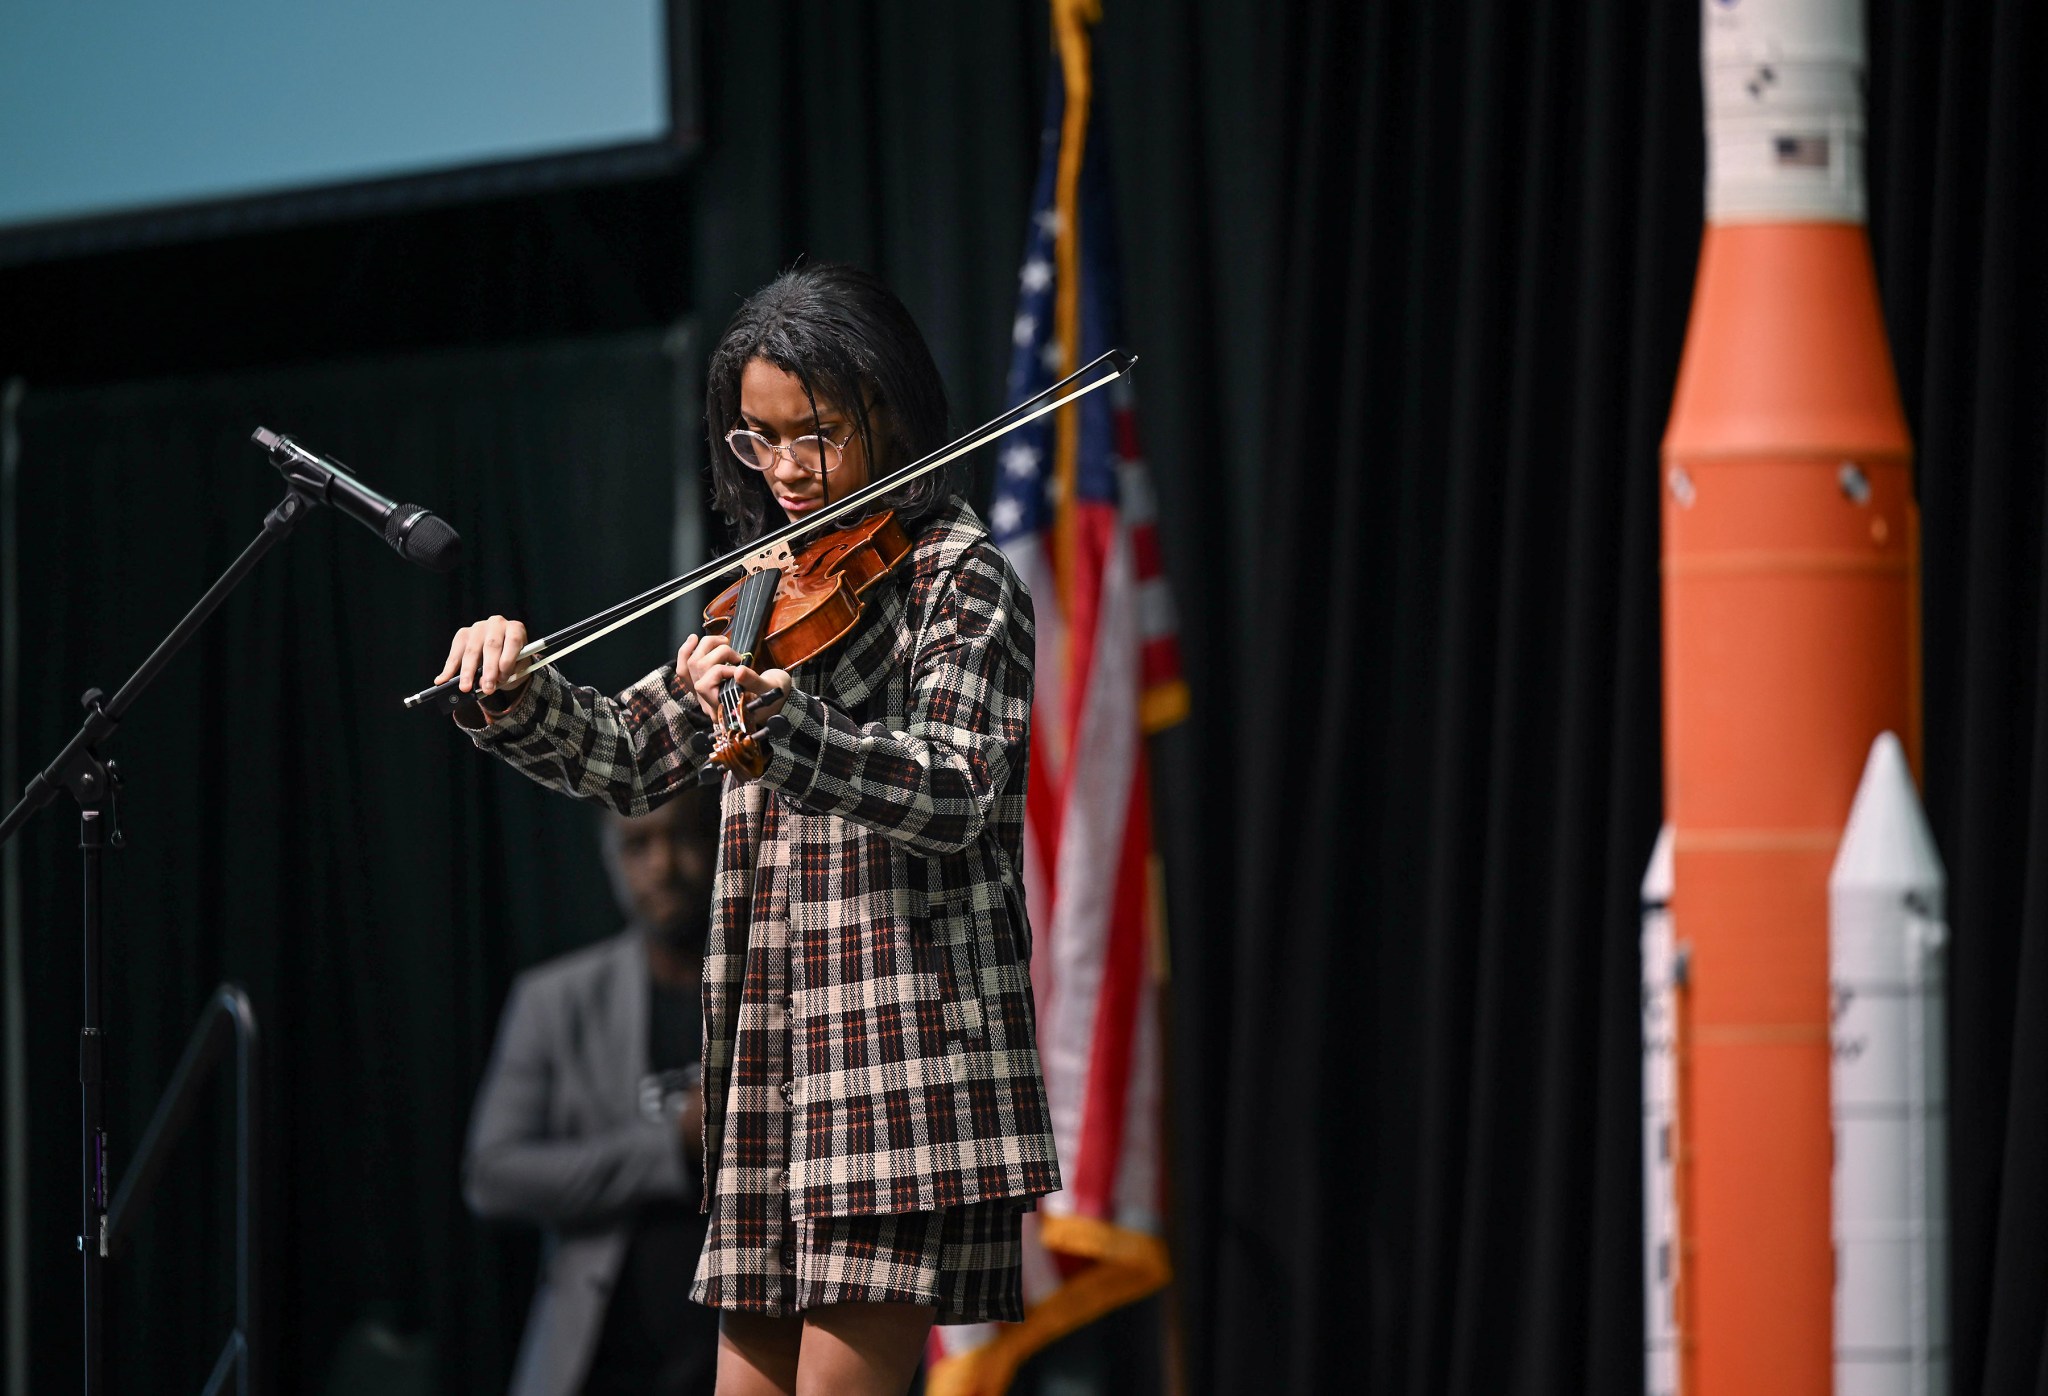 Violinist Laila Willis, 12, performs “Lift Every Voice and Sing” during the Black History Month observance event.